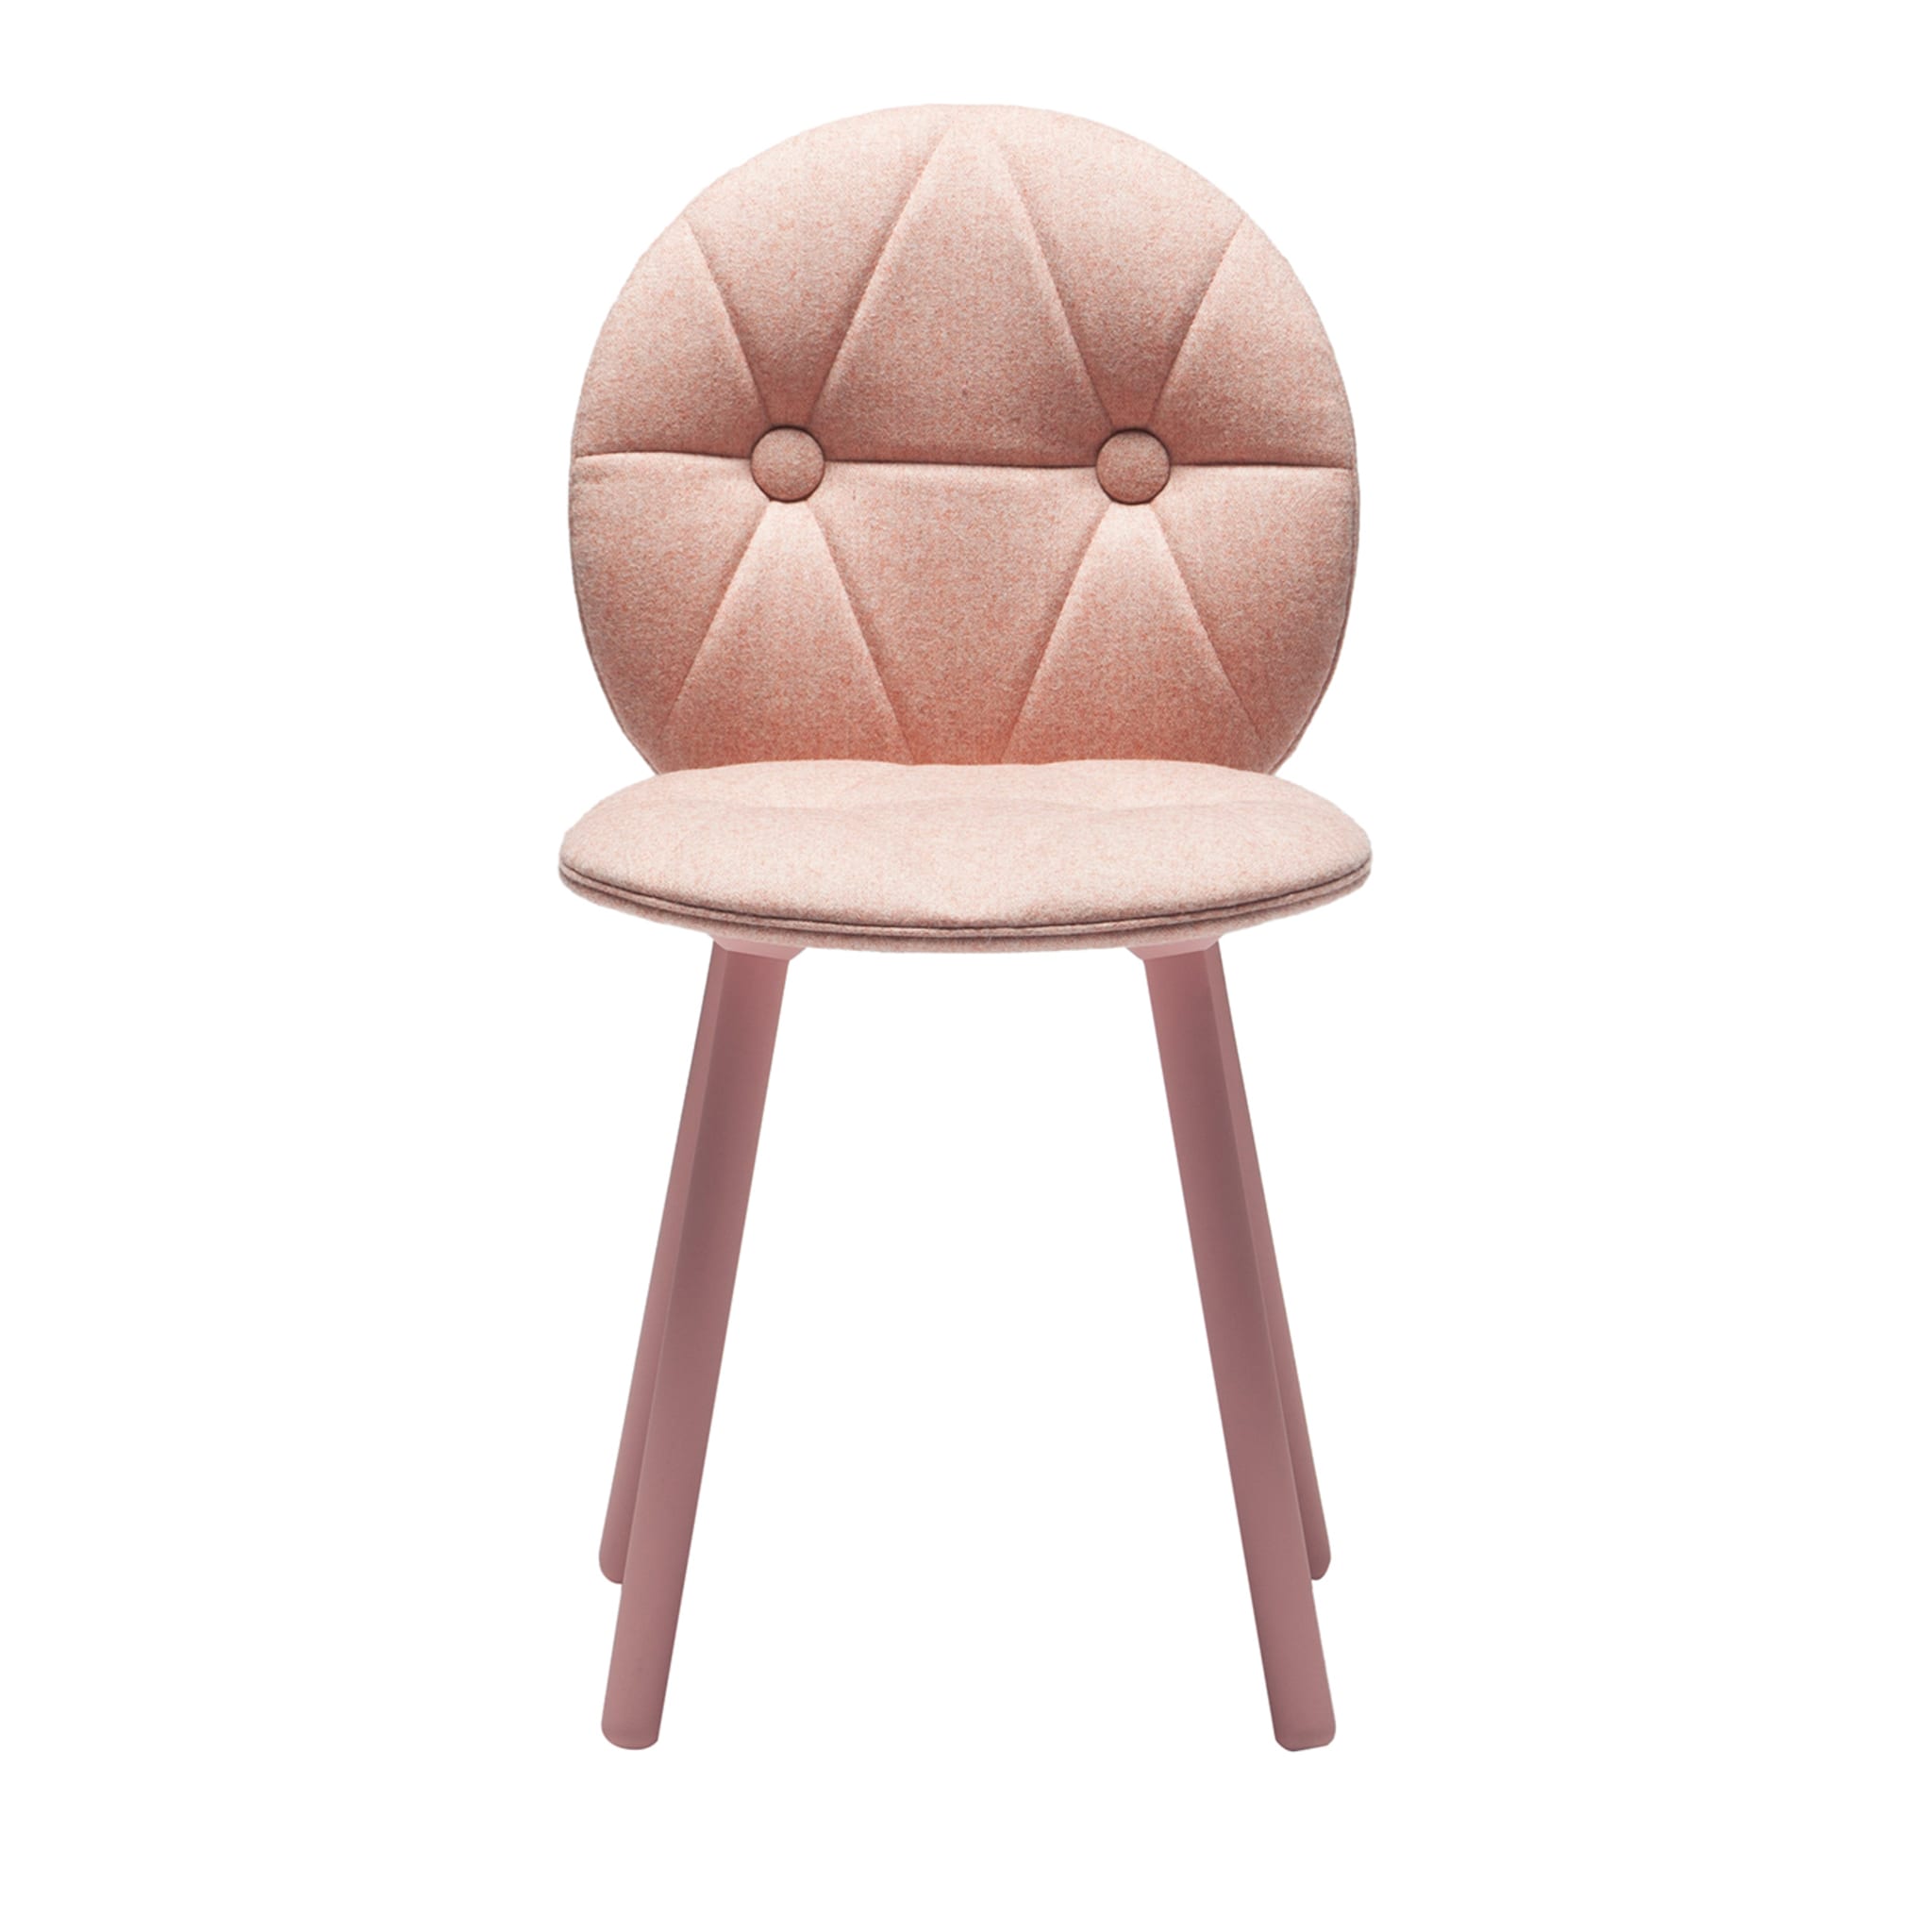 Harlequin 900 Pink Chair by Markus Johansson - Main view